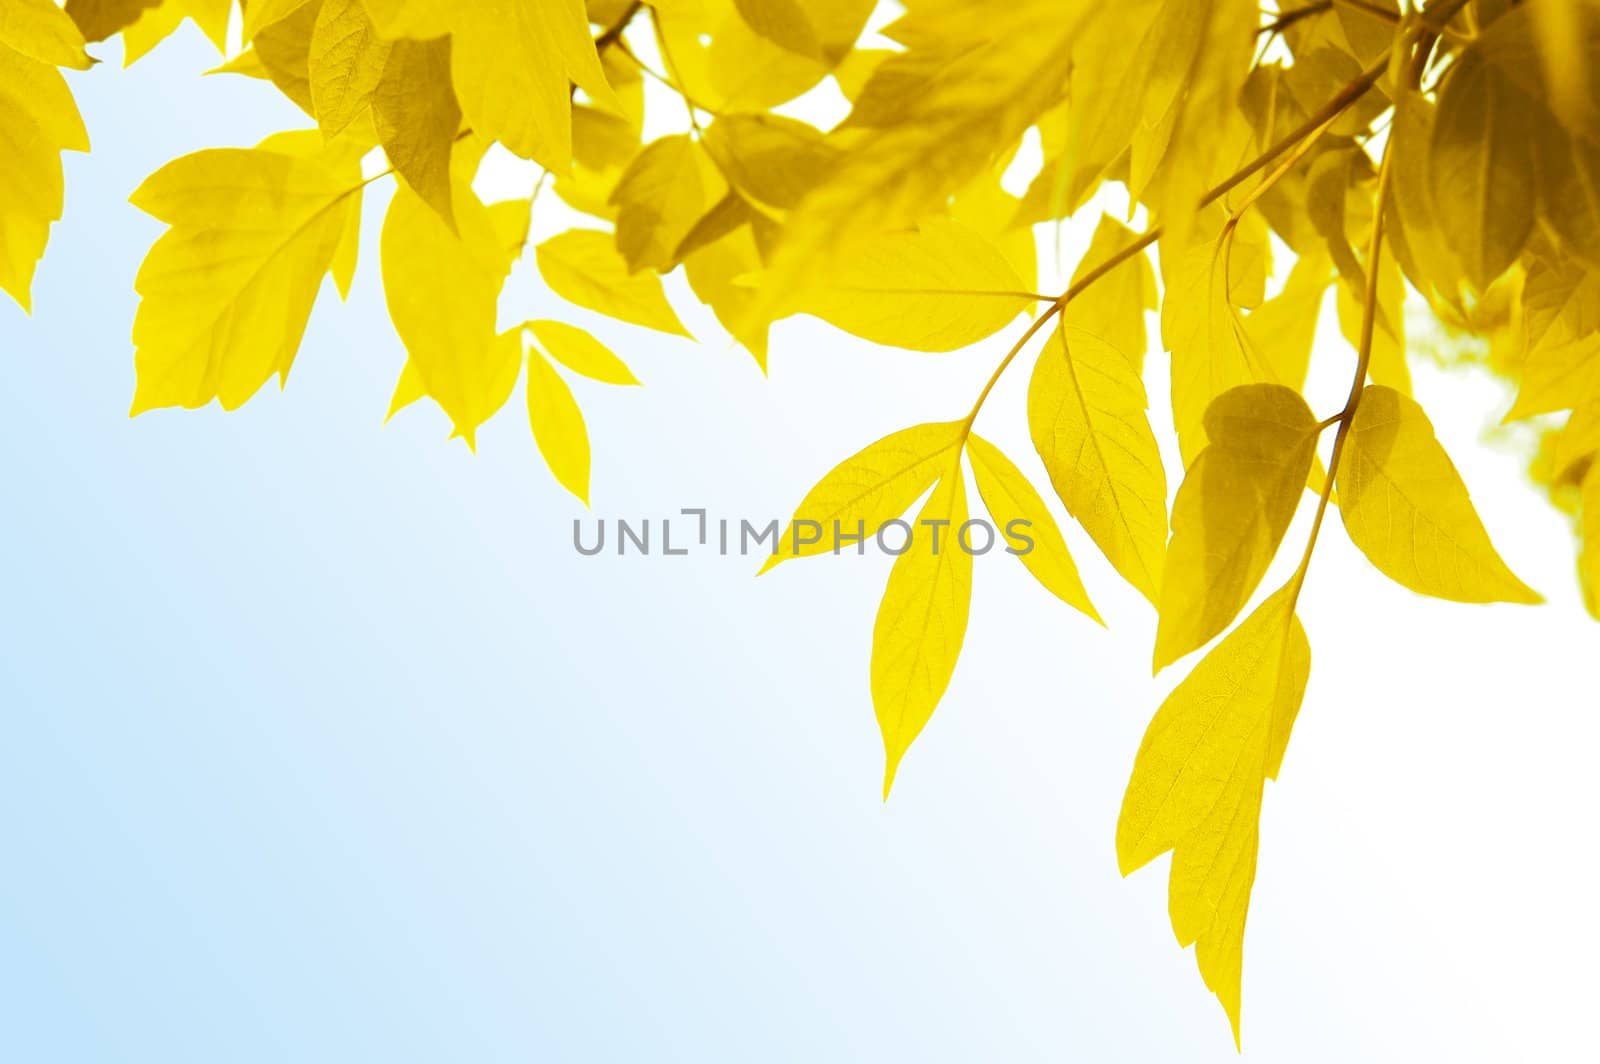 Frame of yellow leaves over light blue background